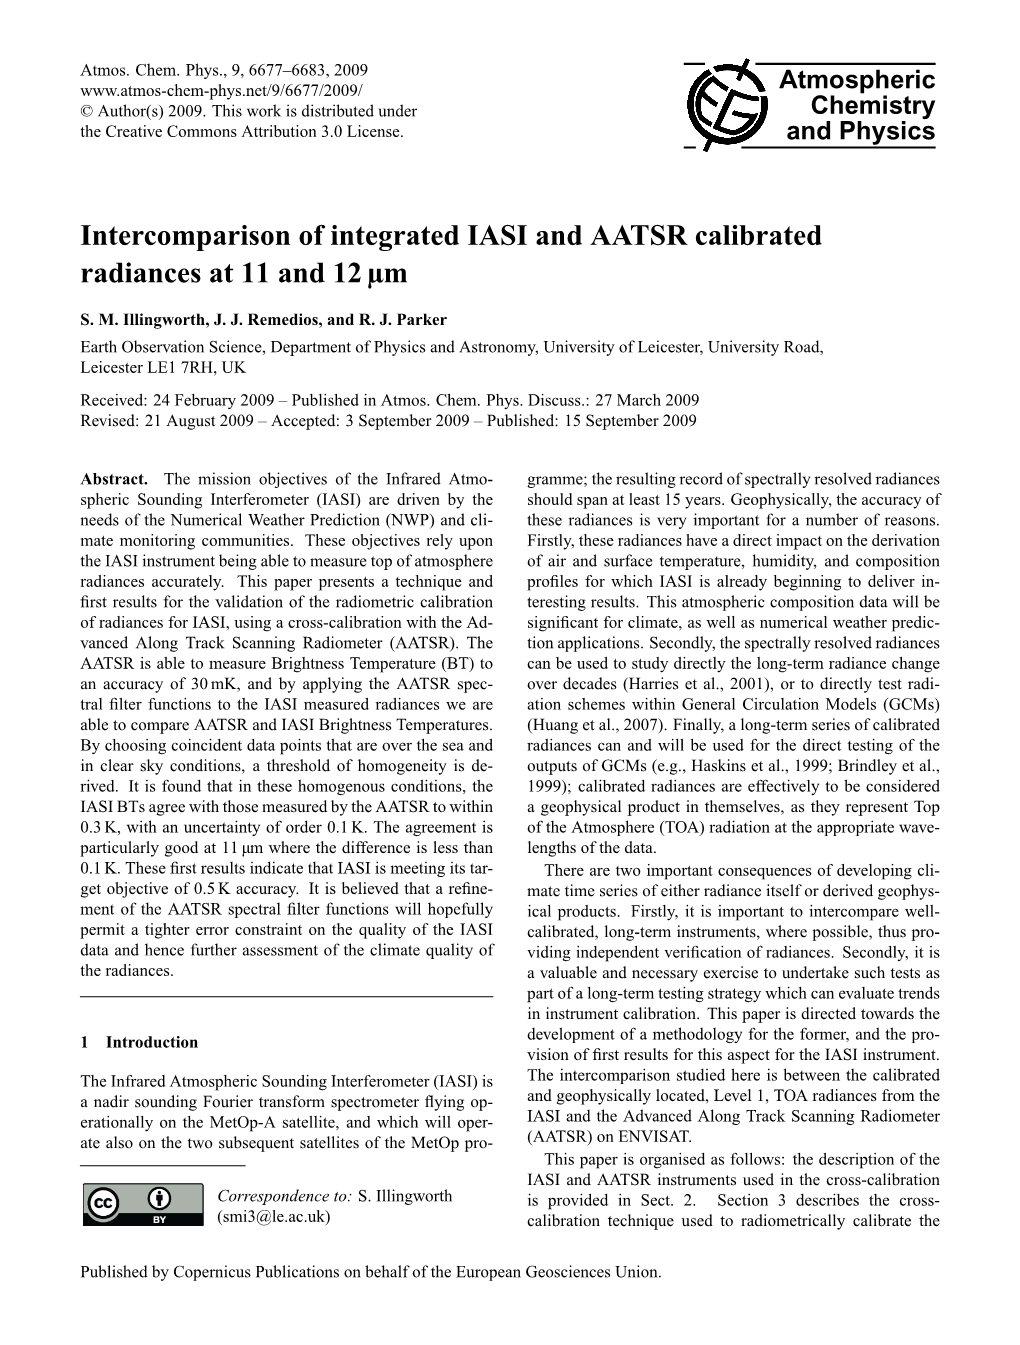 Intercomparison of Integrated IASI and AATSR Calibrated Radiances at 11 and 12 Μm